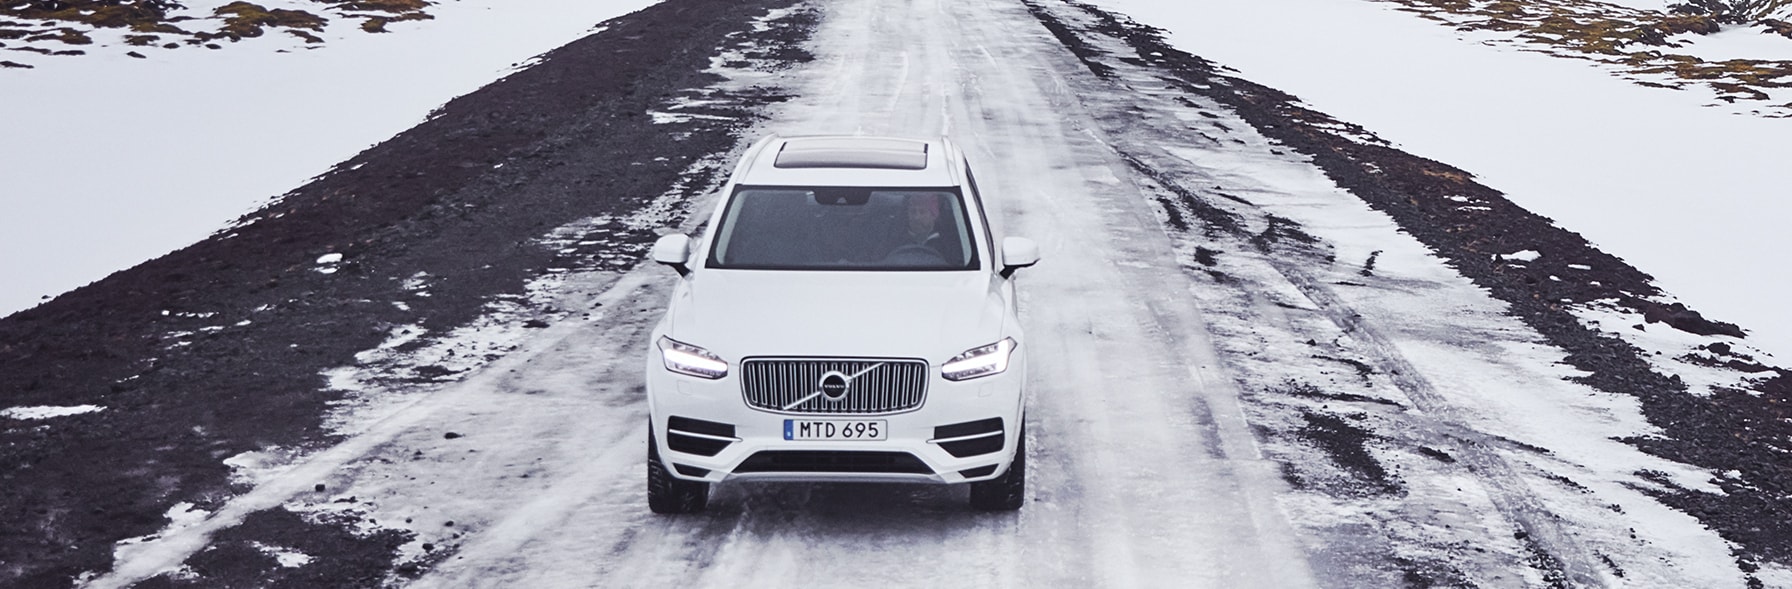 Volvos For Winter Driving